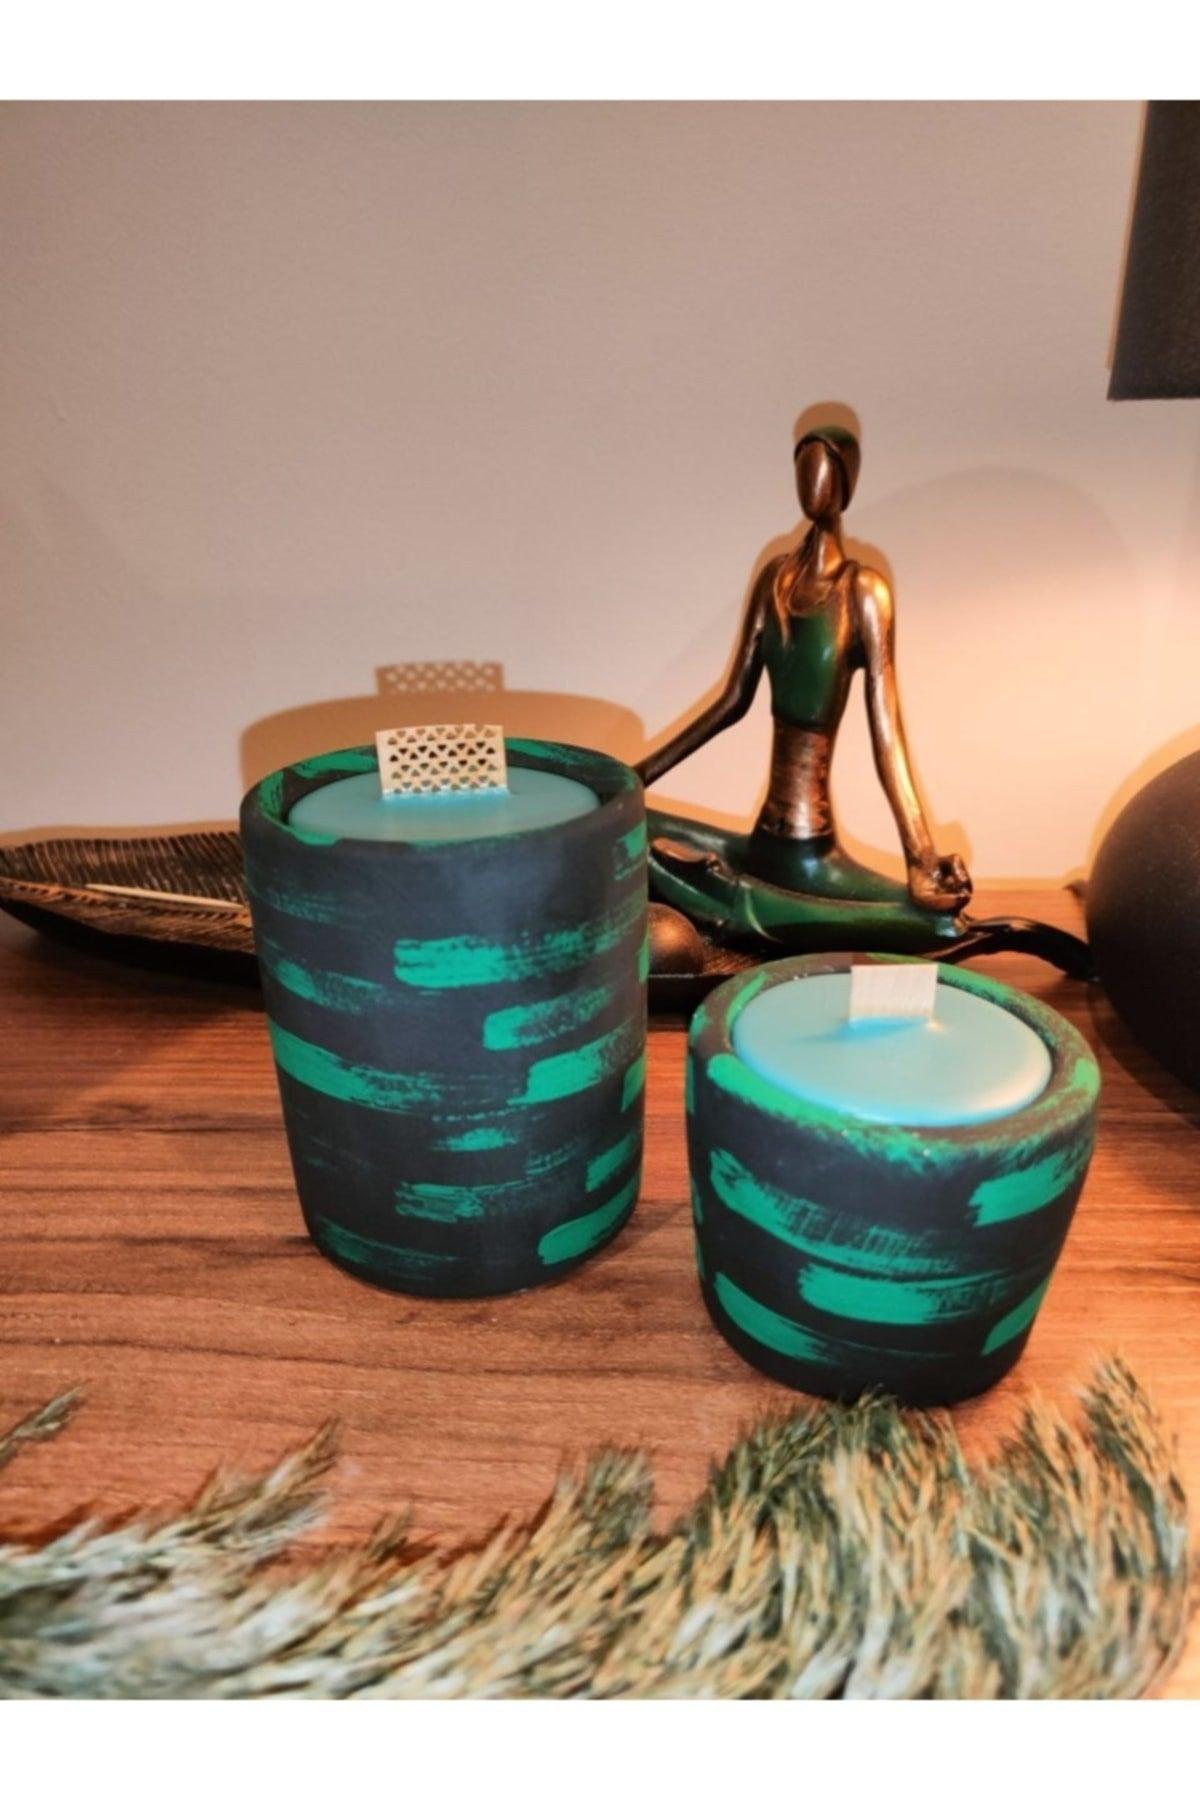 Decorative 100% Soyawax Natural Mint Scented Bamboo Wick Aromatherapy Candle Set - 2 Pieces - Swordslife